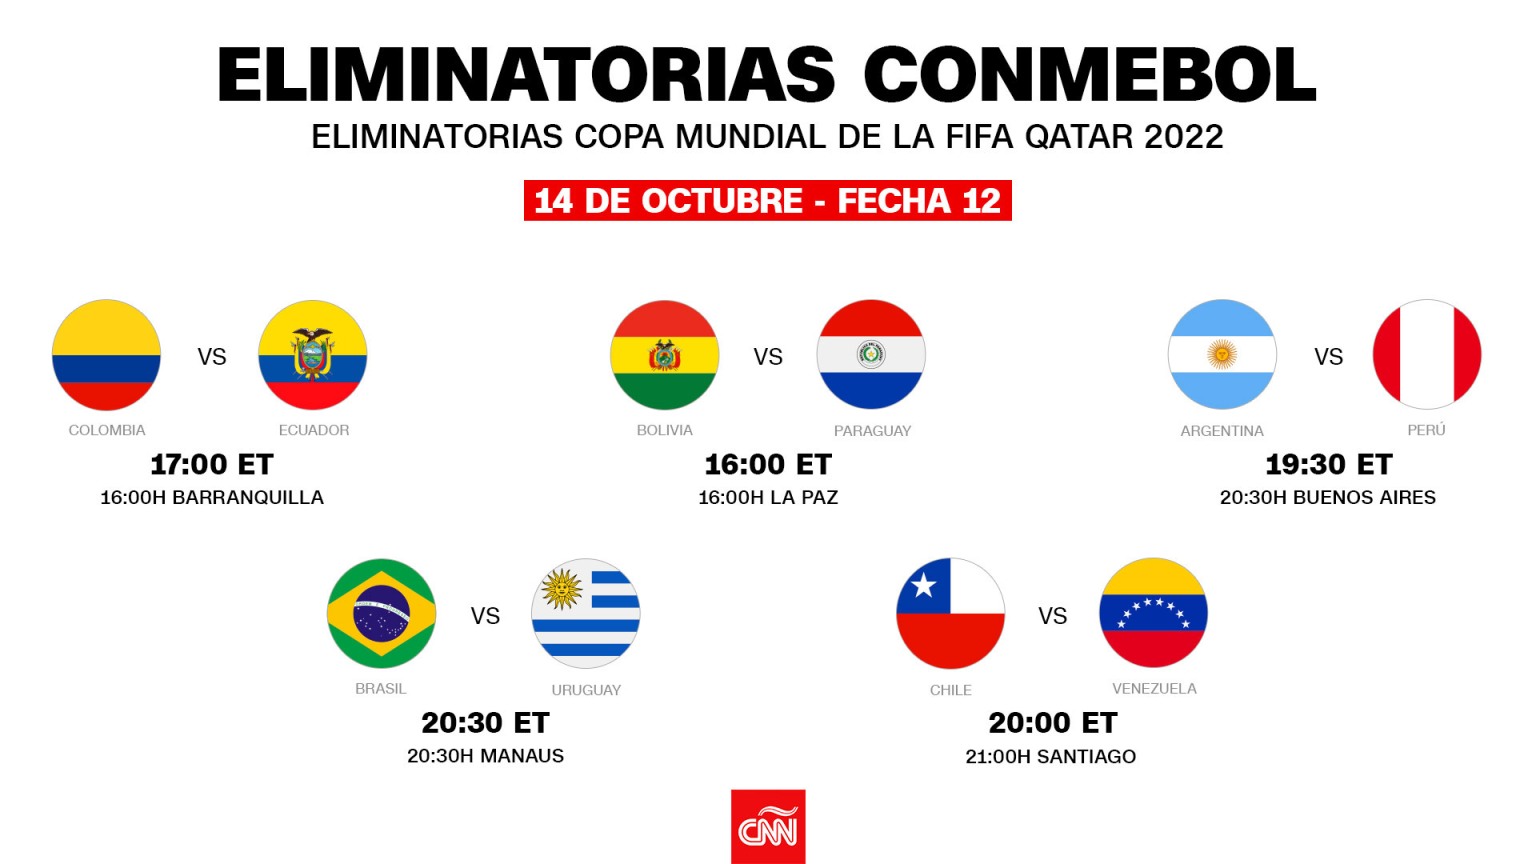 The matches of day 12 of the South American qualifiers